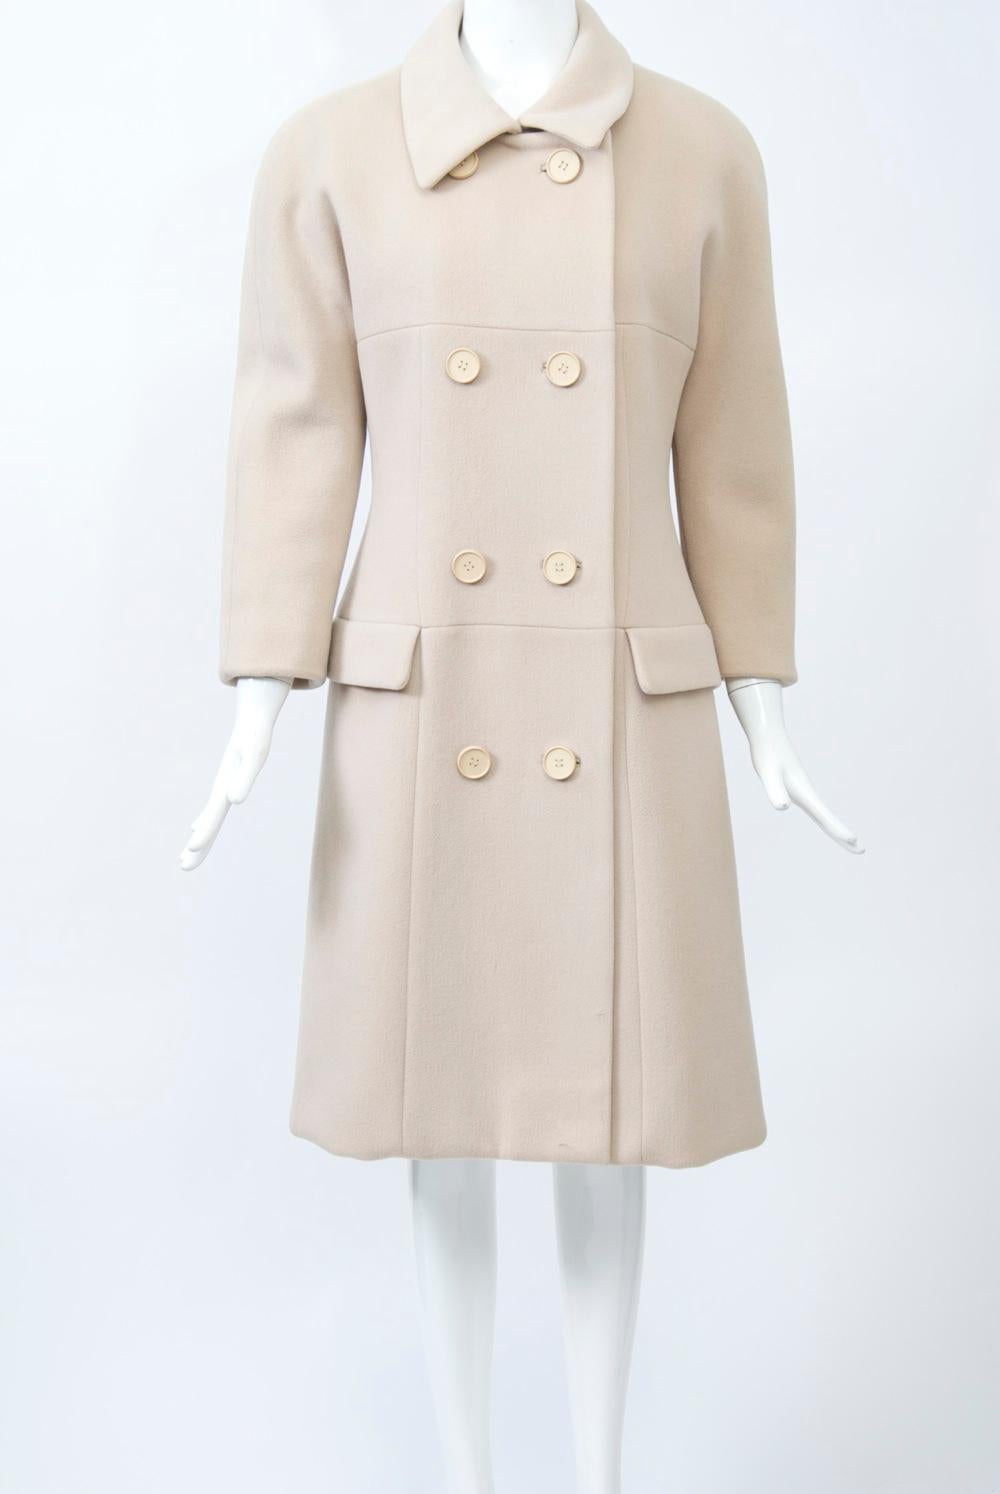 Iconic Norell 1960s styling defines this beige wool coat. Double breasted styling with eight buttons, a small pointed collar, and dolman sleeves that reach above the wrists. Special details include horizontal seams at the bust and the hip, where two